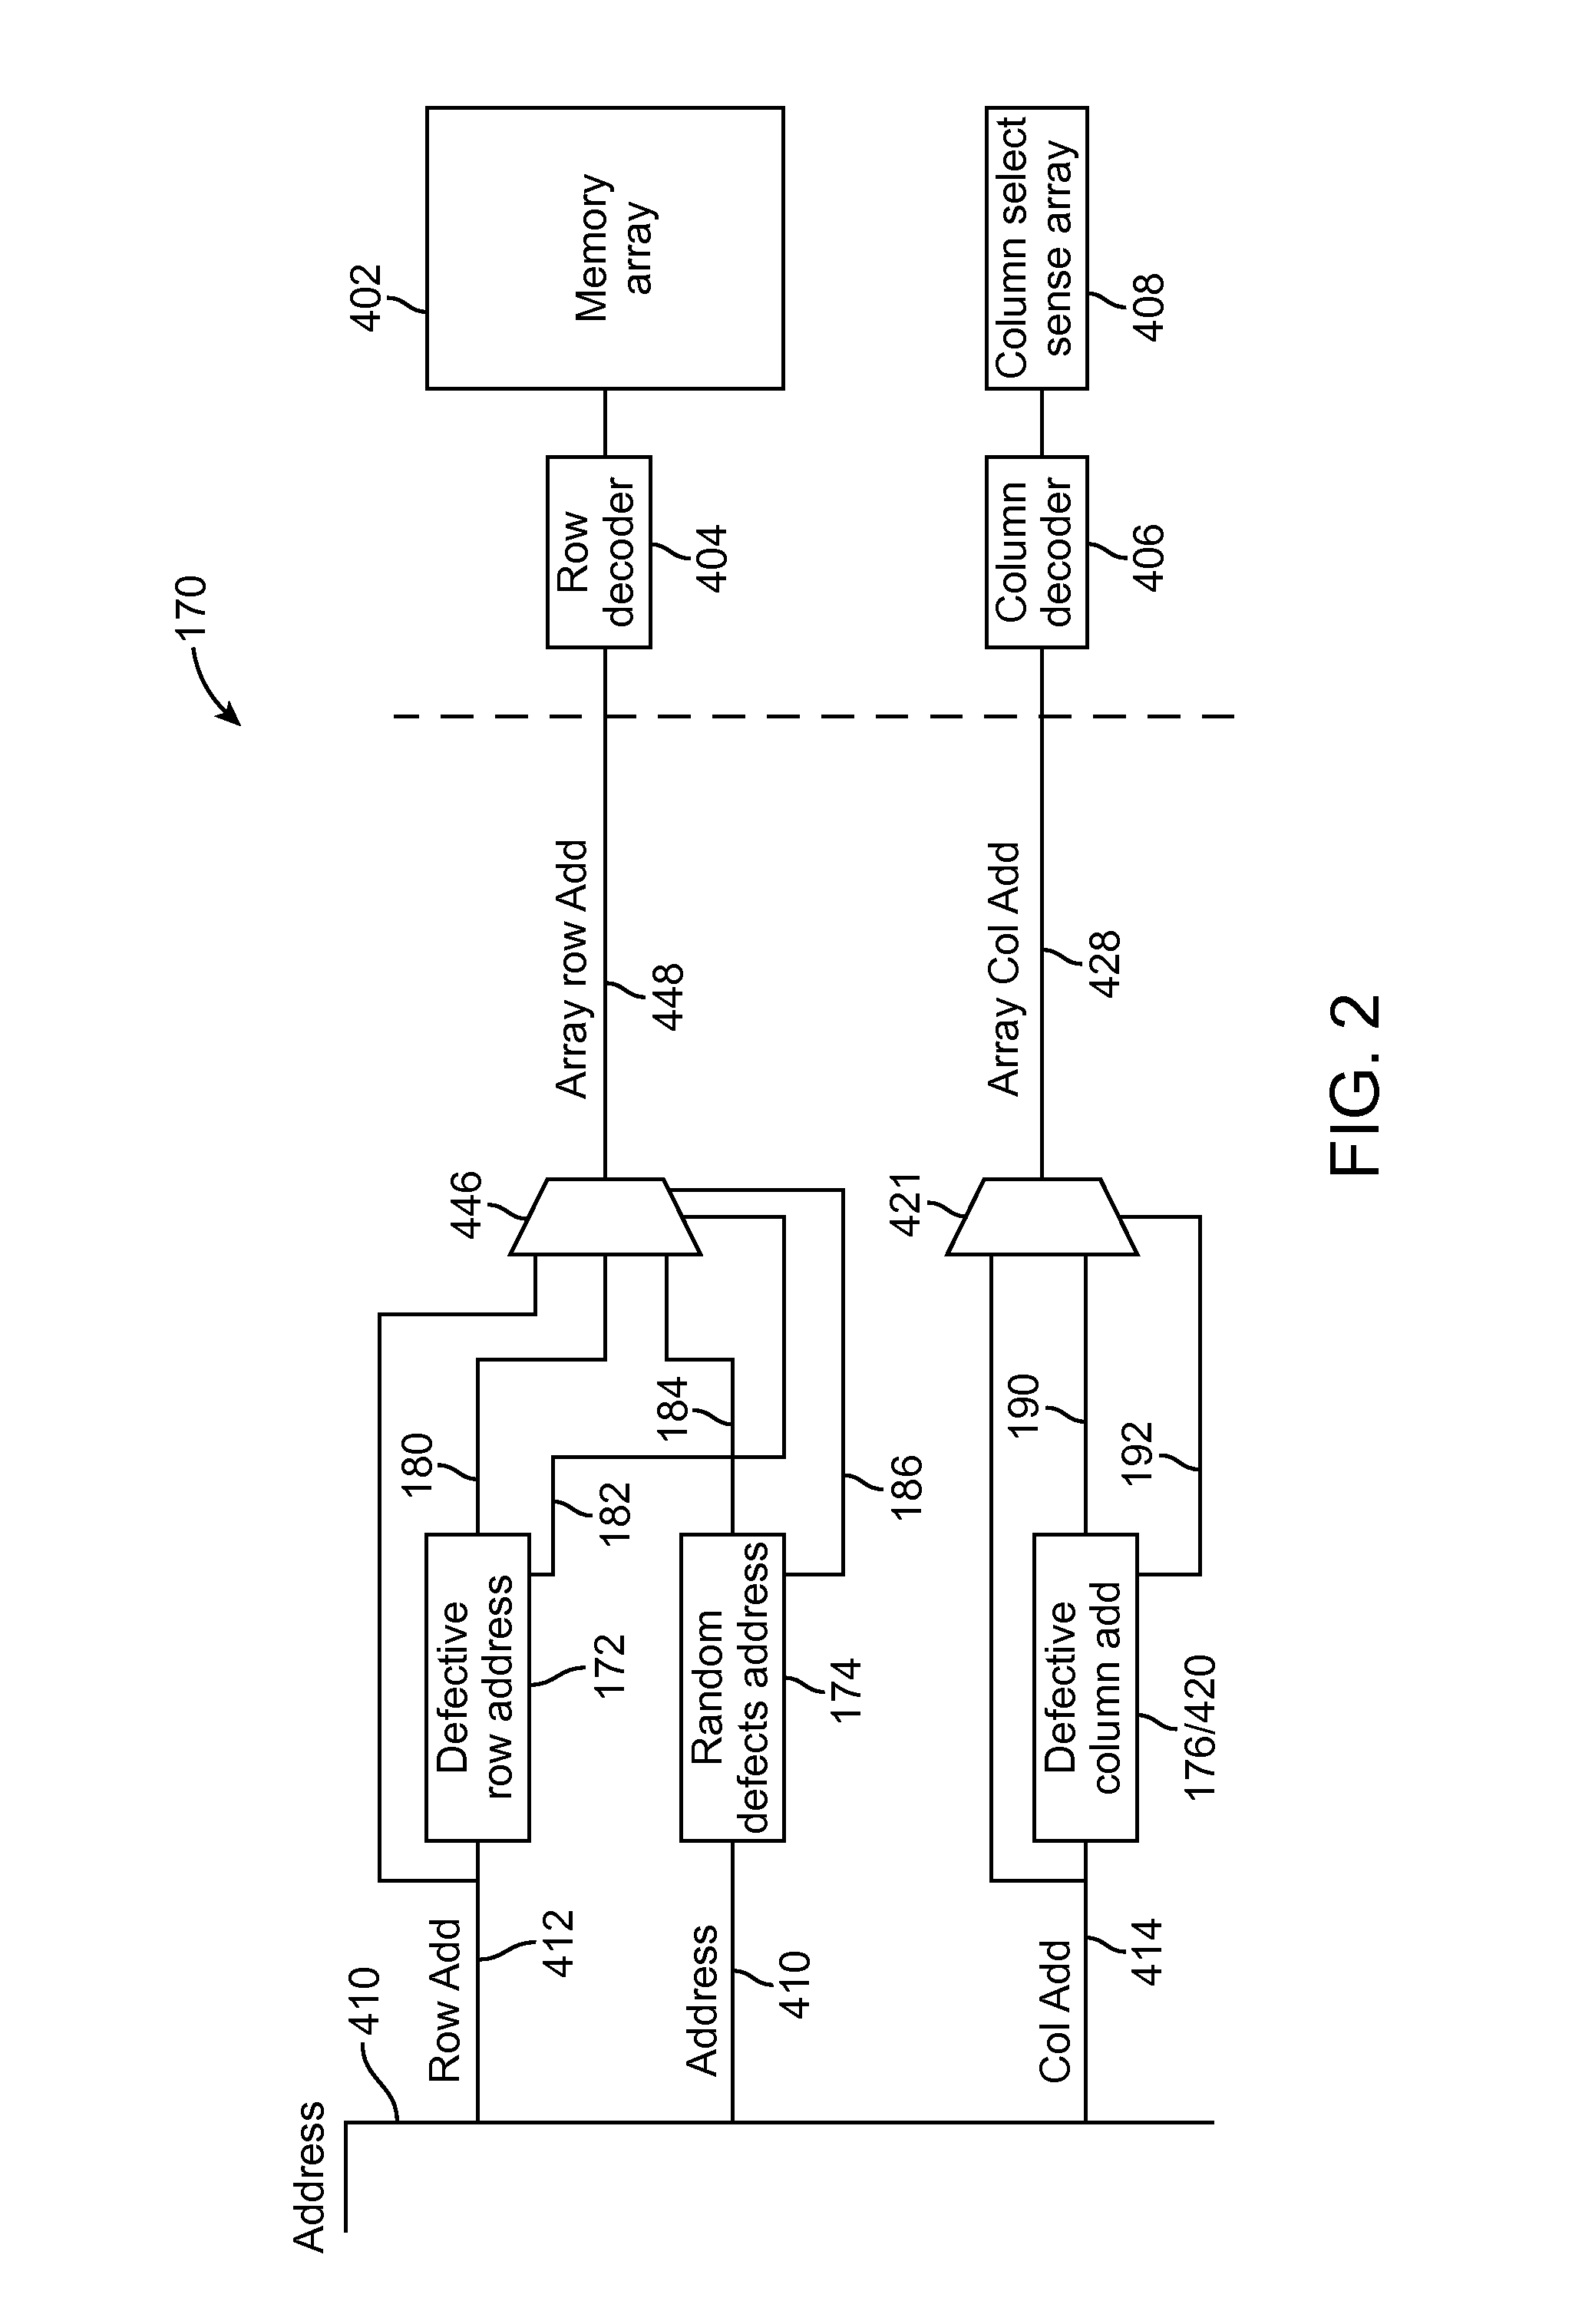 Mapping of random defects in a memory device